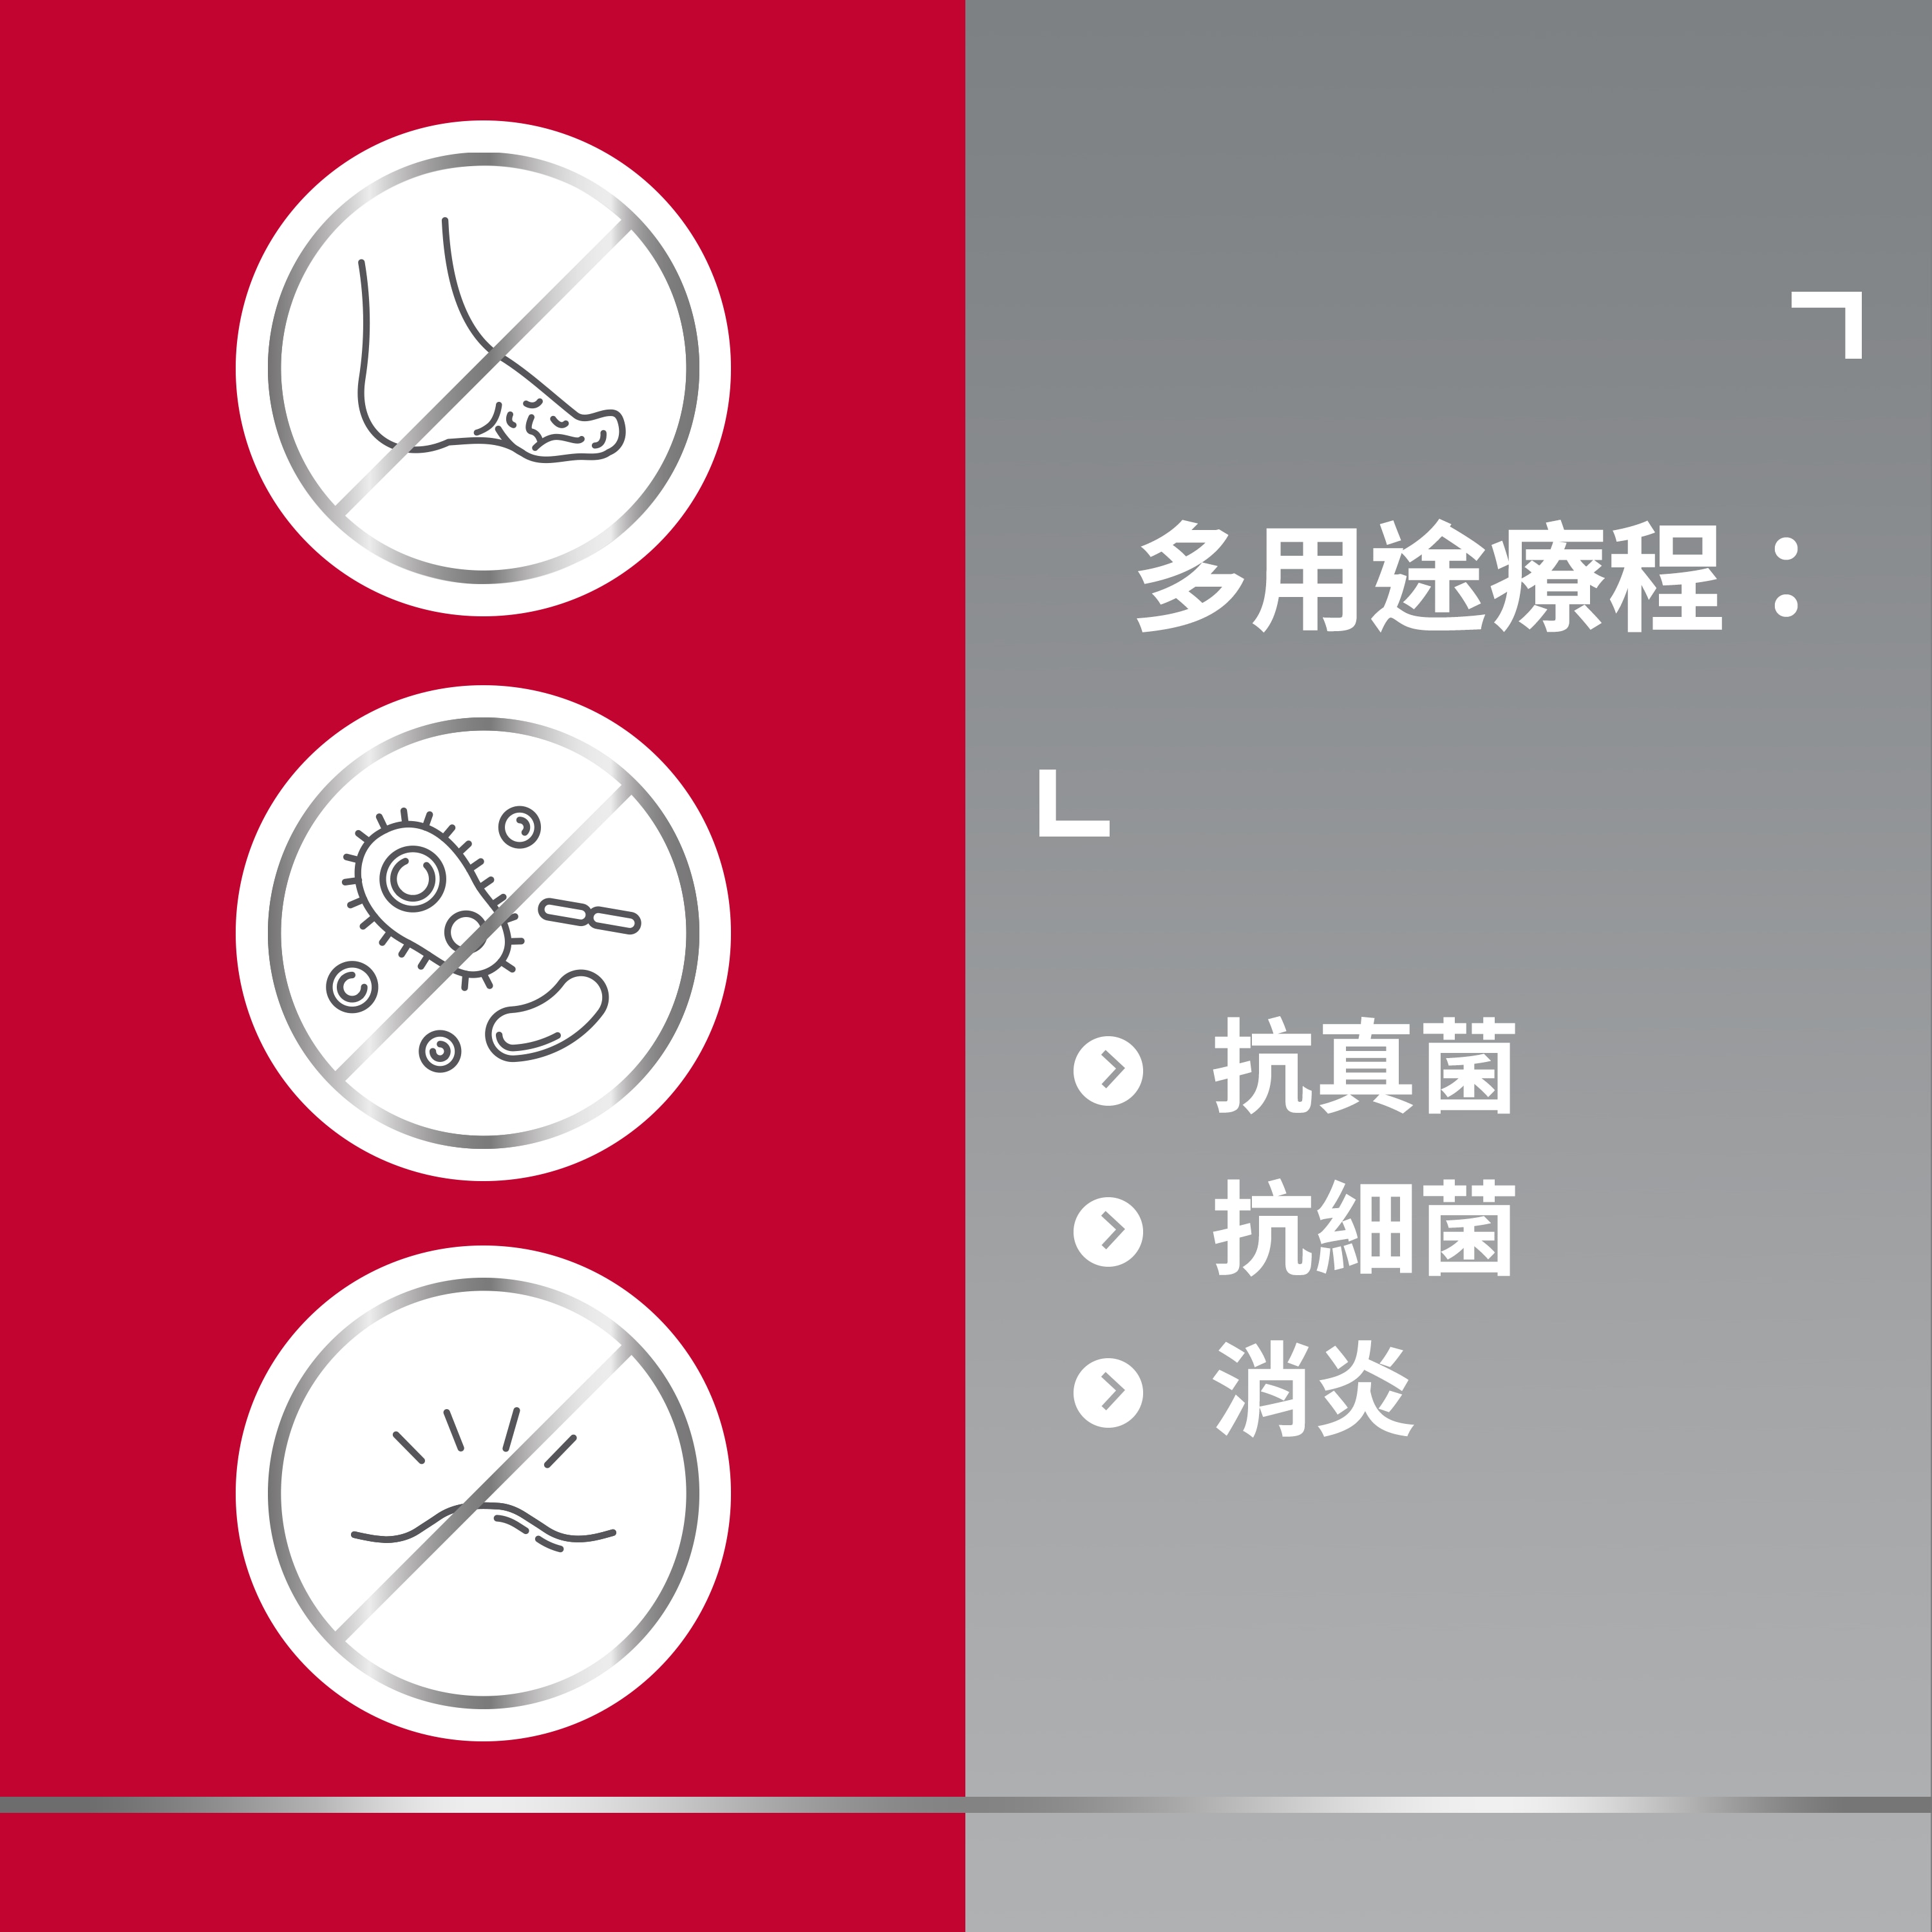 Three icons showing fungal and bacterial infections and inflammatory skin conditions, with caption on the right: Multi-action treatment: 1. Anti-fungal, 2. Anti-bacterial, 3. Anti-inflammatory  